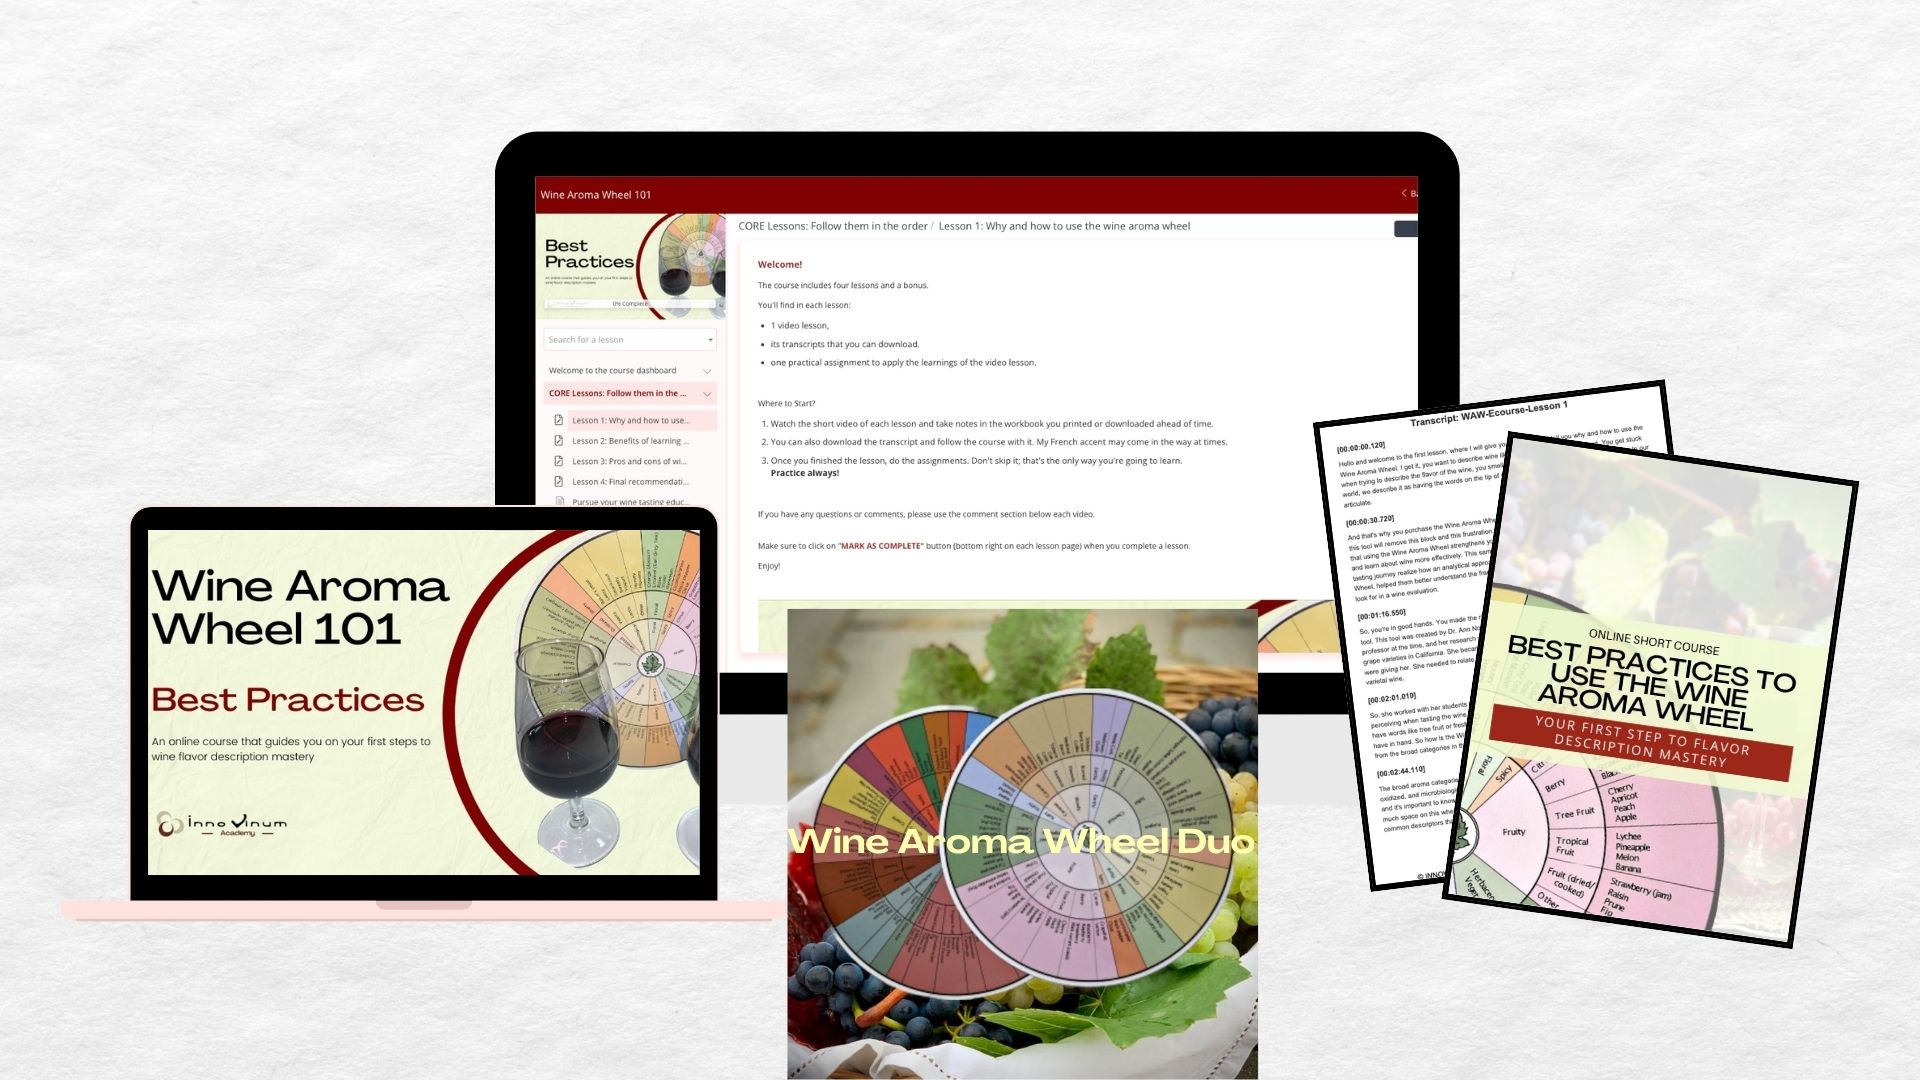 An image showing the content offered in the Wine Aroma Wheel Duo Bundle. A great way to learn how to use the wine aroma wheel.